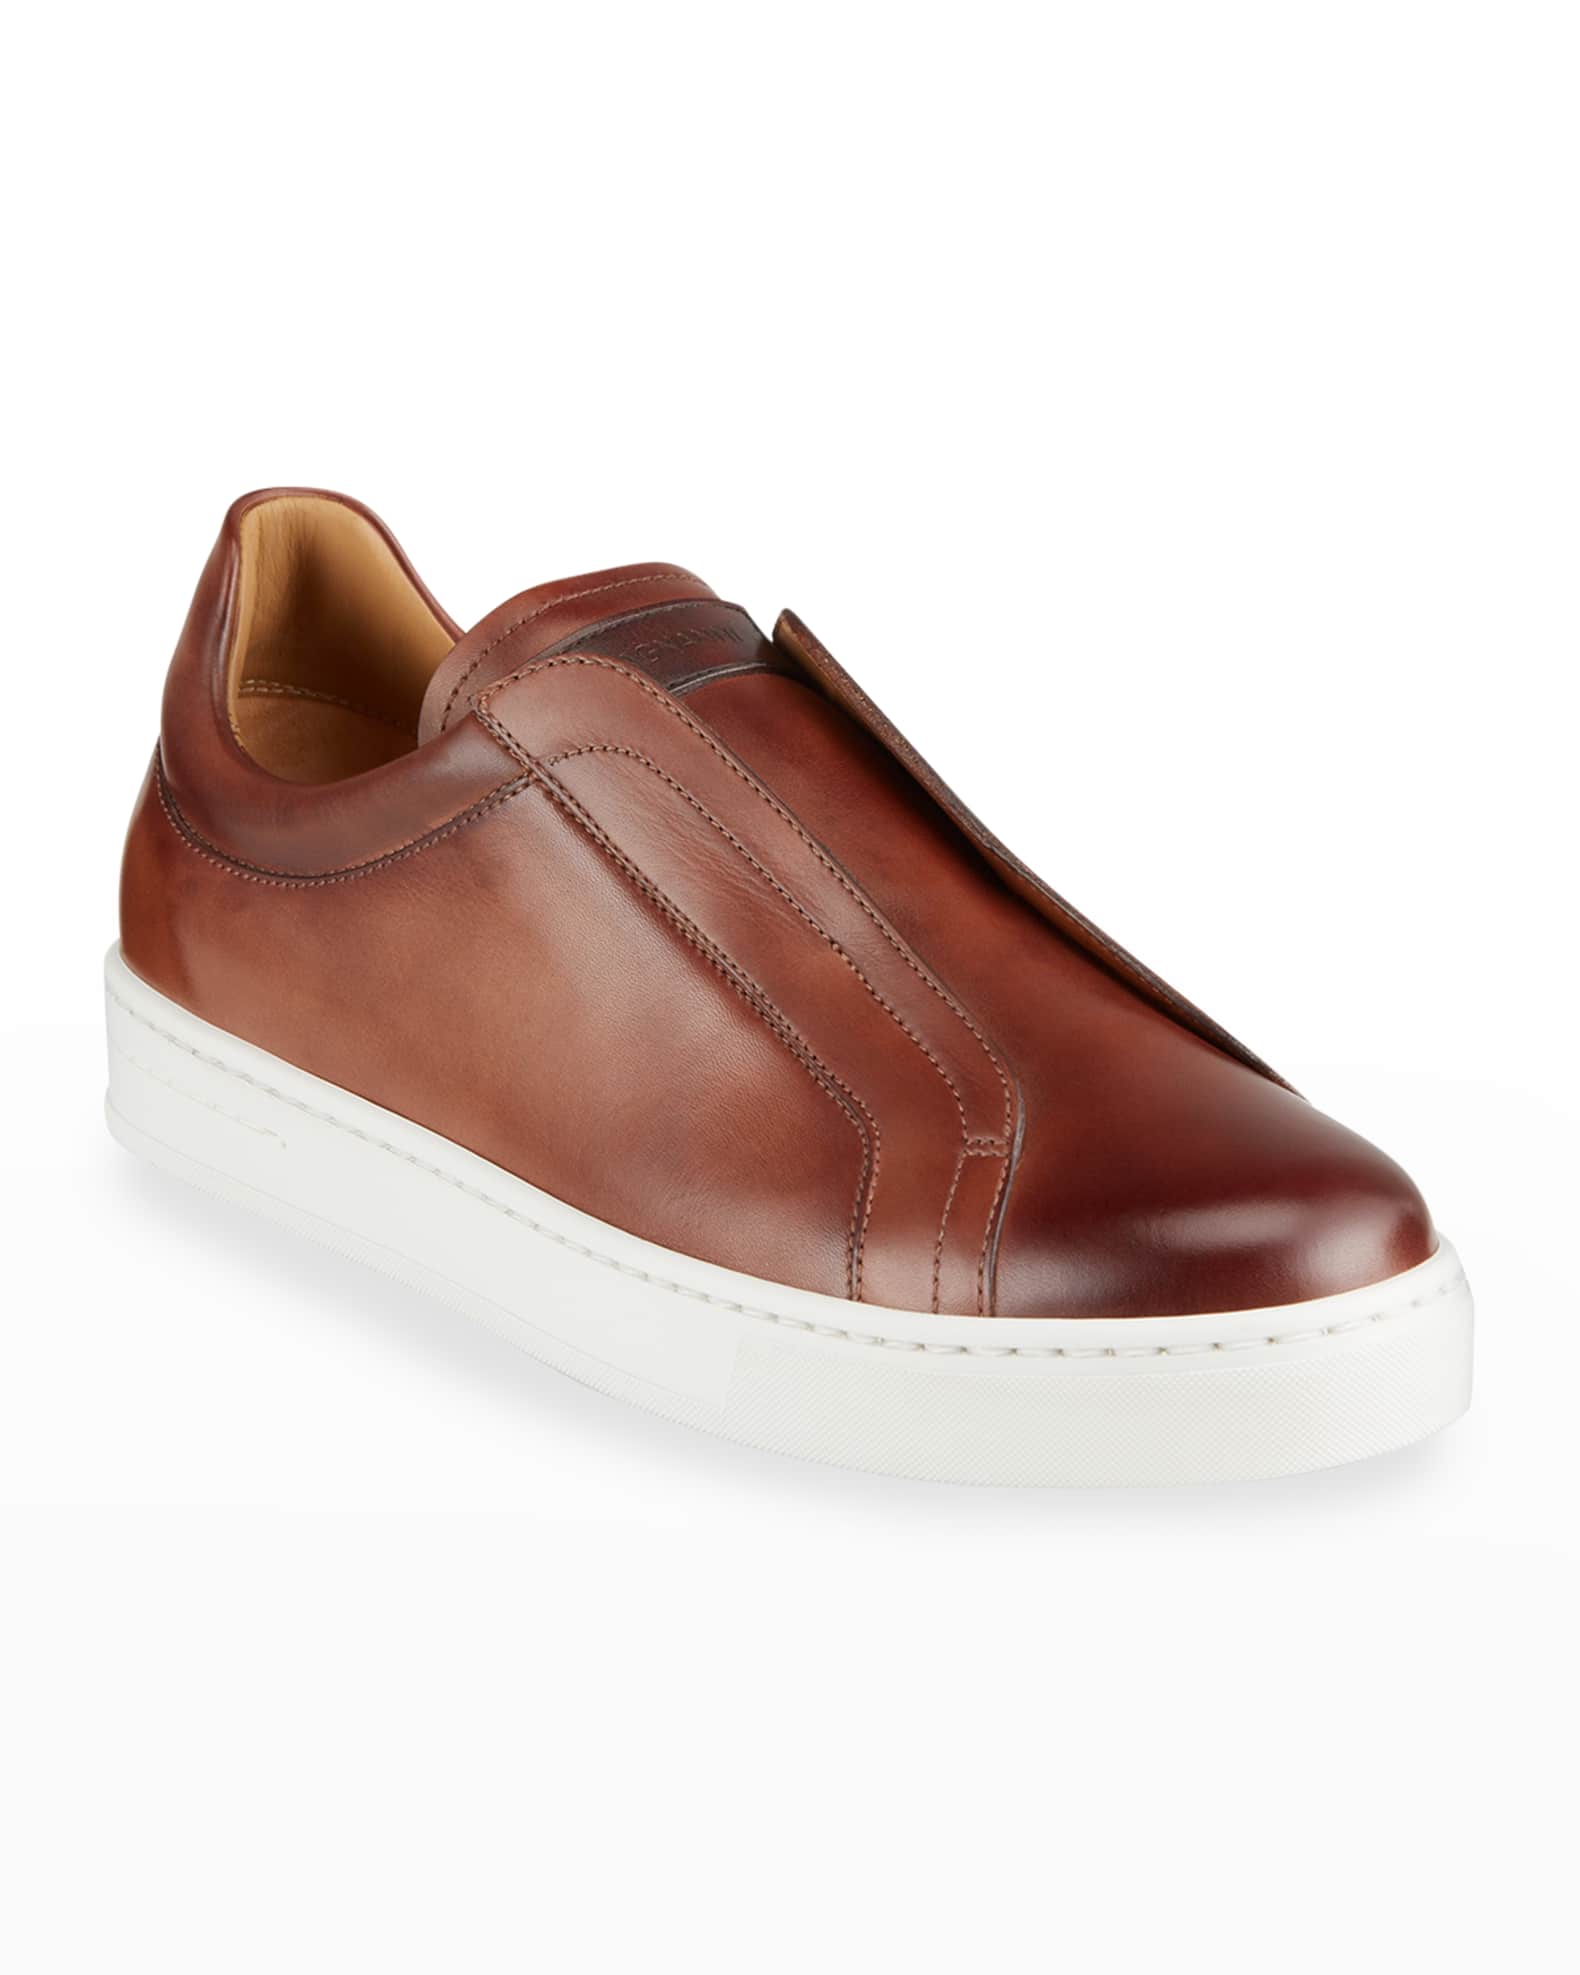 Magnanni Slip-On Sneakers | Marcus